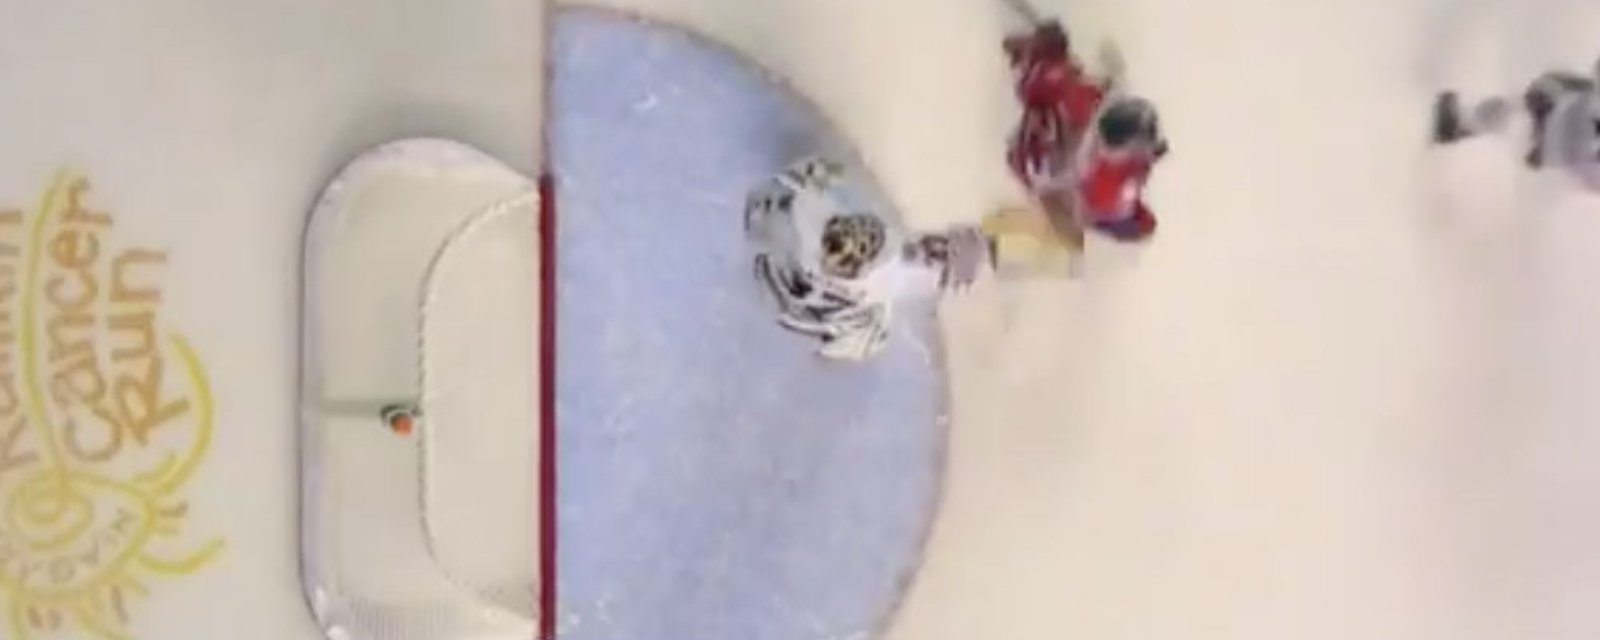 OHL goalie Sbaraglia gets ejected for slashing opponent’s neck with his stick 